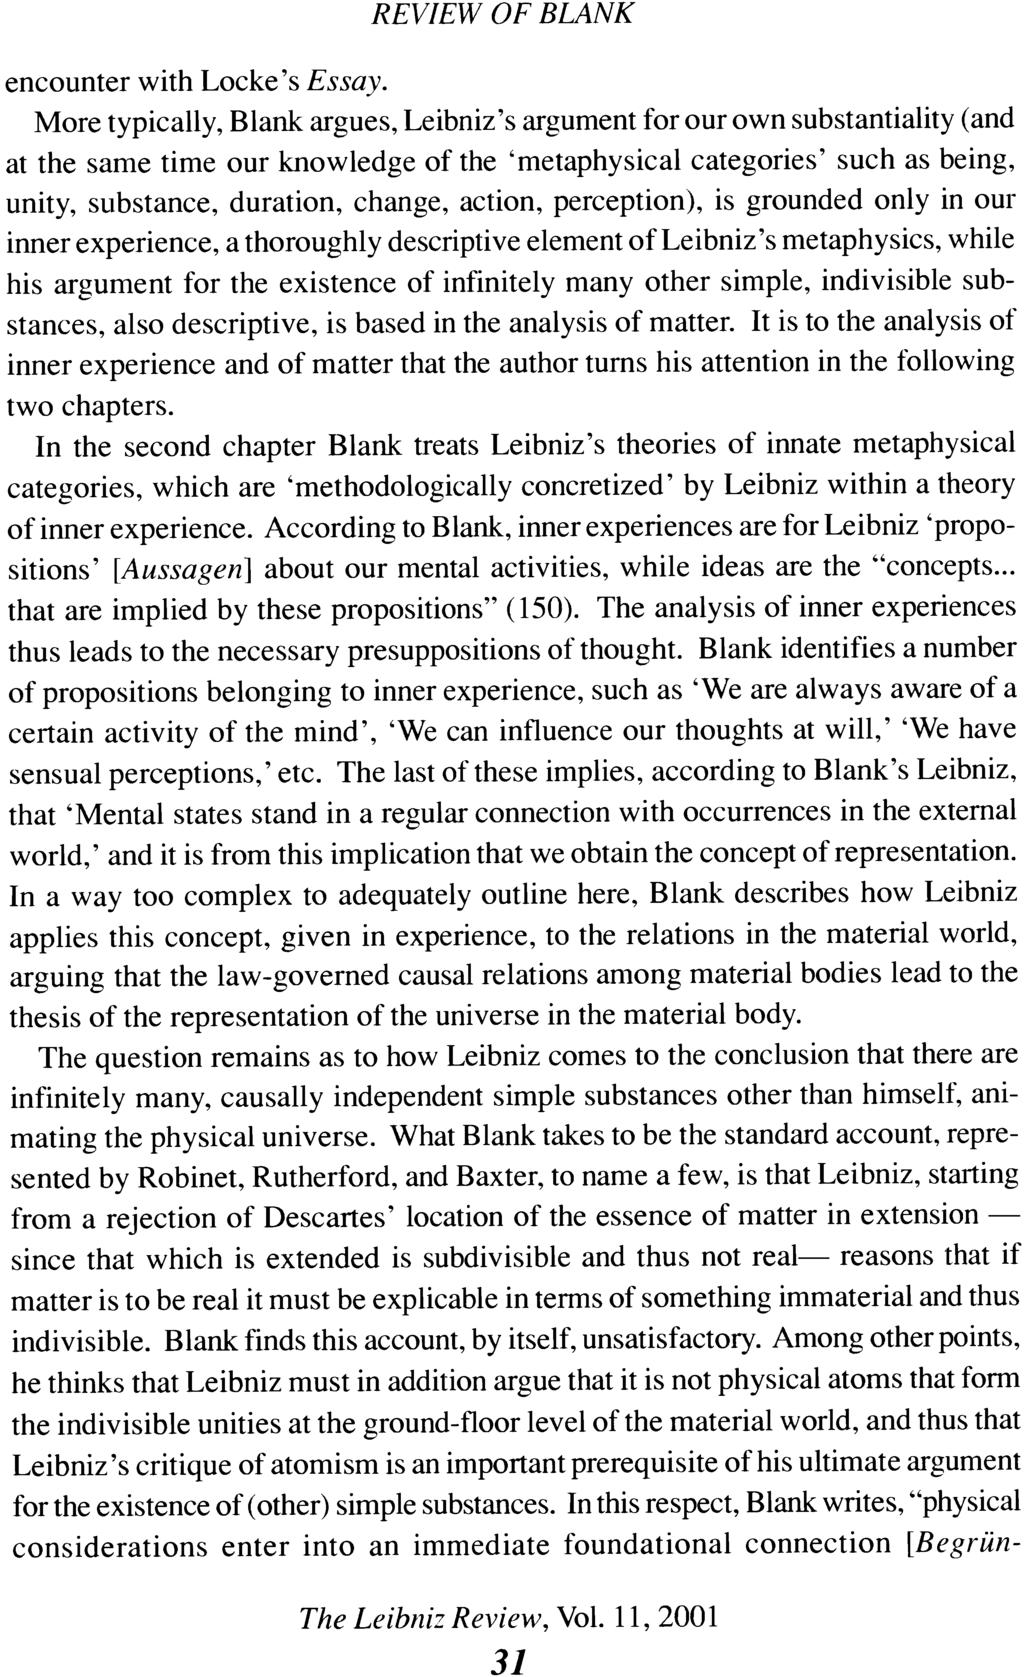 REVIEW OF BLANK encounter with Locke's Essay.